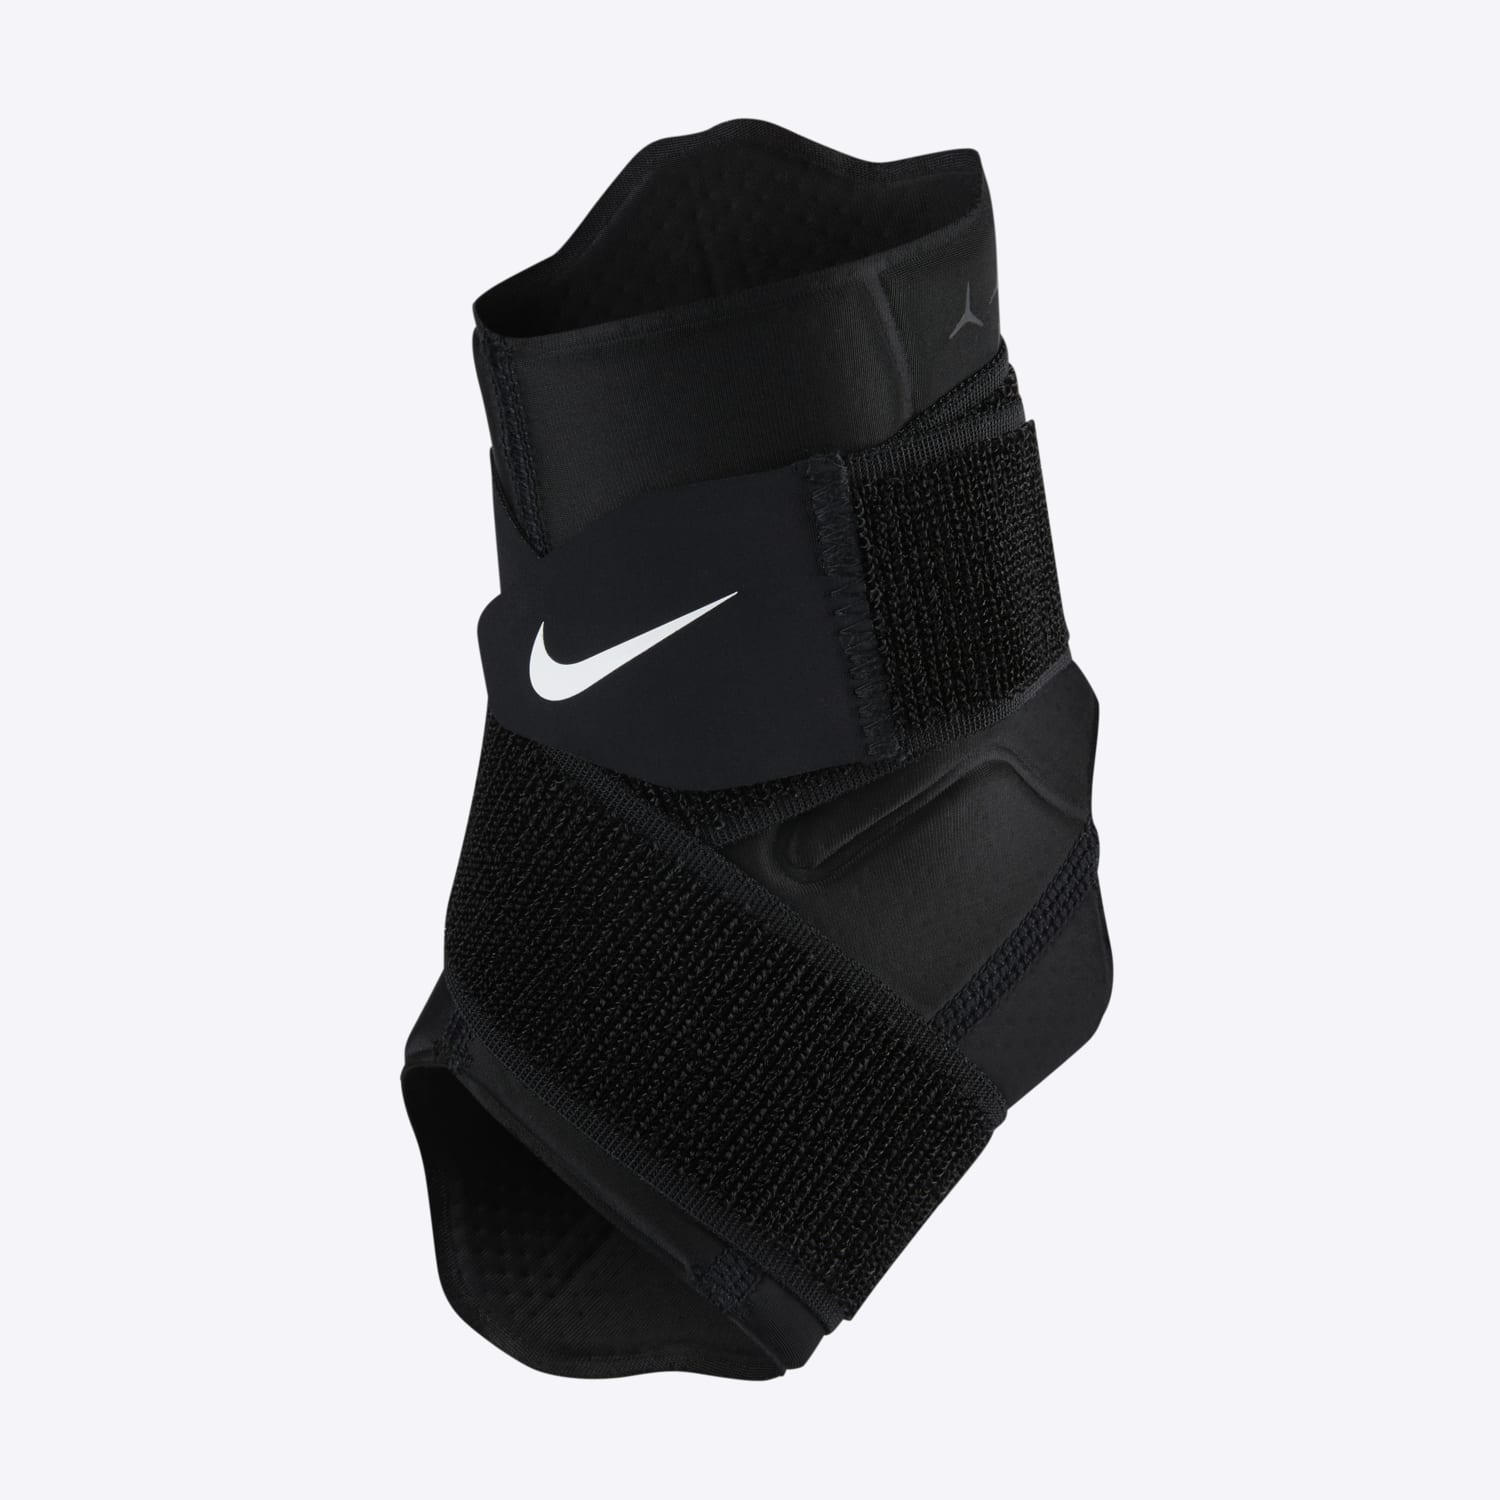 ANKLE SLEEVE WITH STRAP